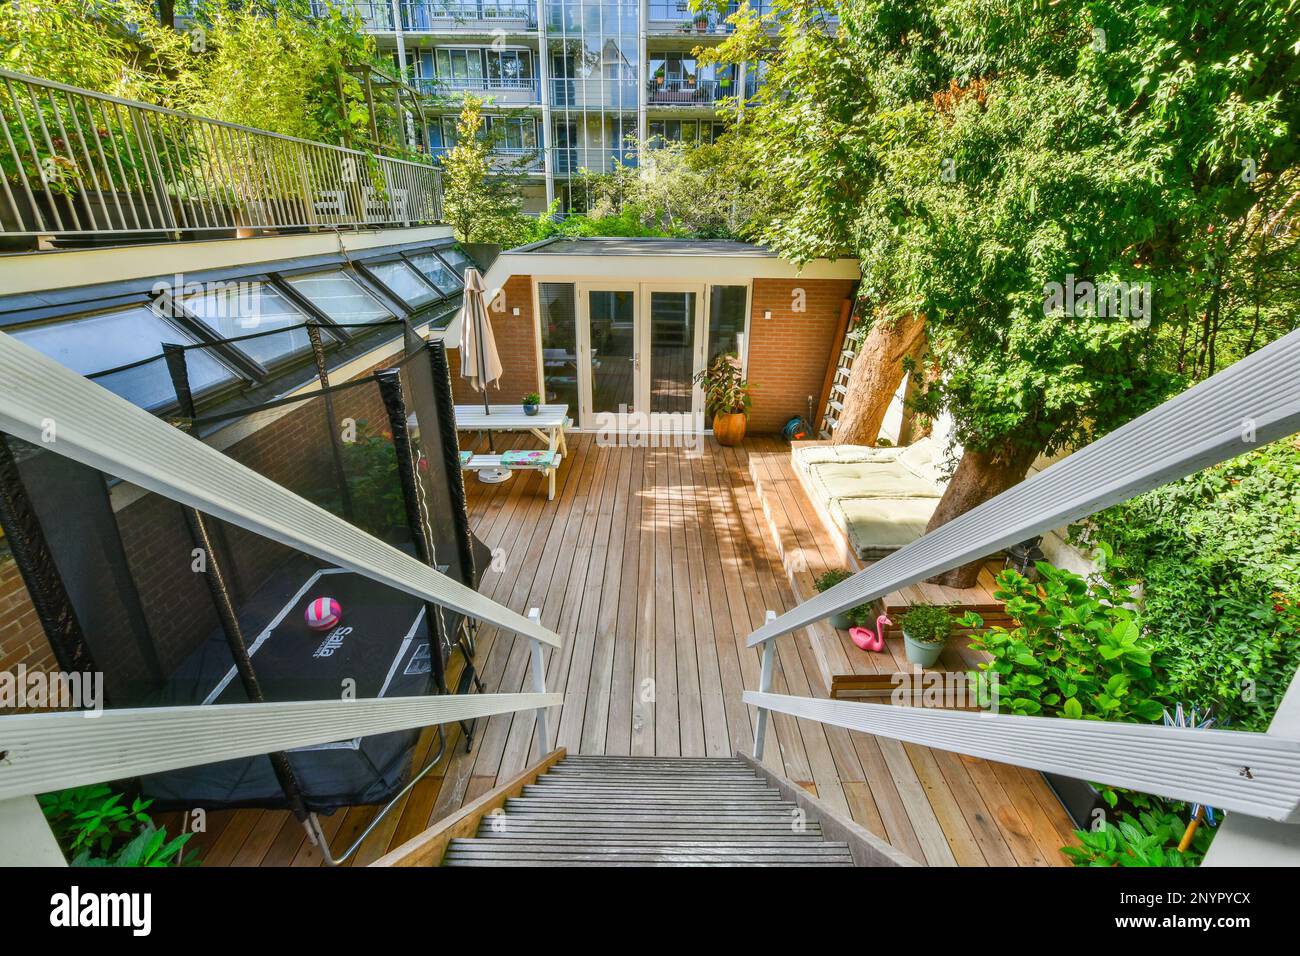 Amsterdam, Netherlands - 10 April, 2021: an outdoor living area with wood flooring and wooden stairs leading up to the upper level, surrounded by trees Stock Photo